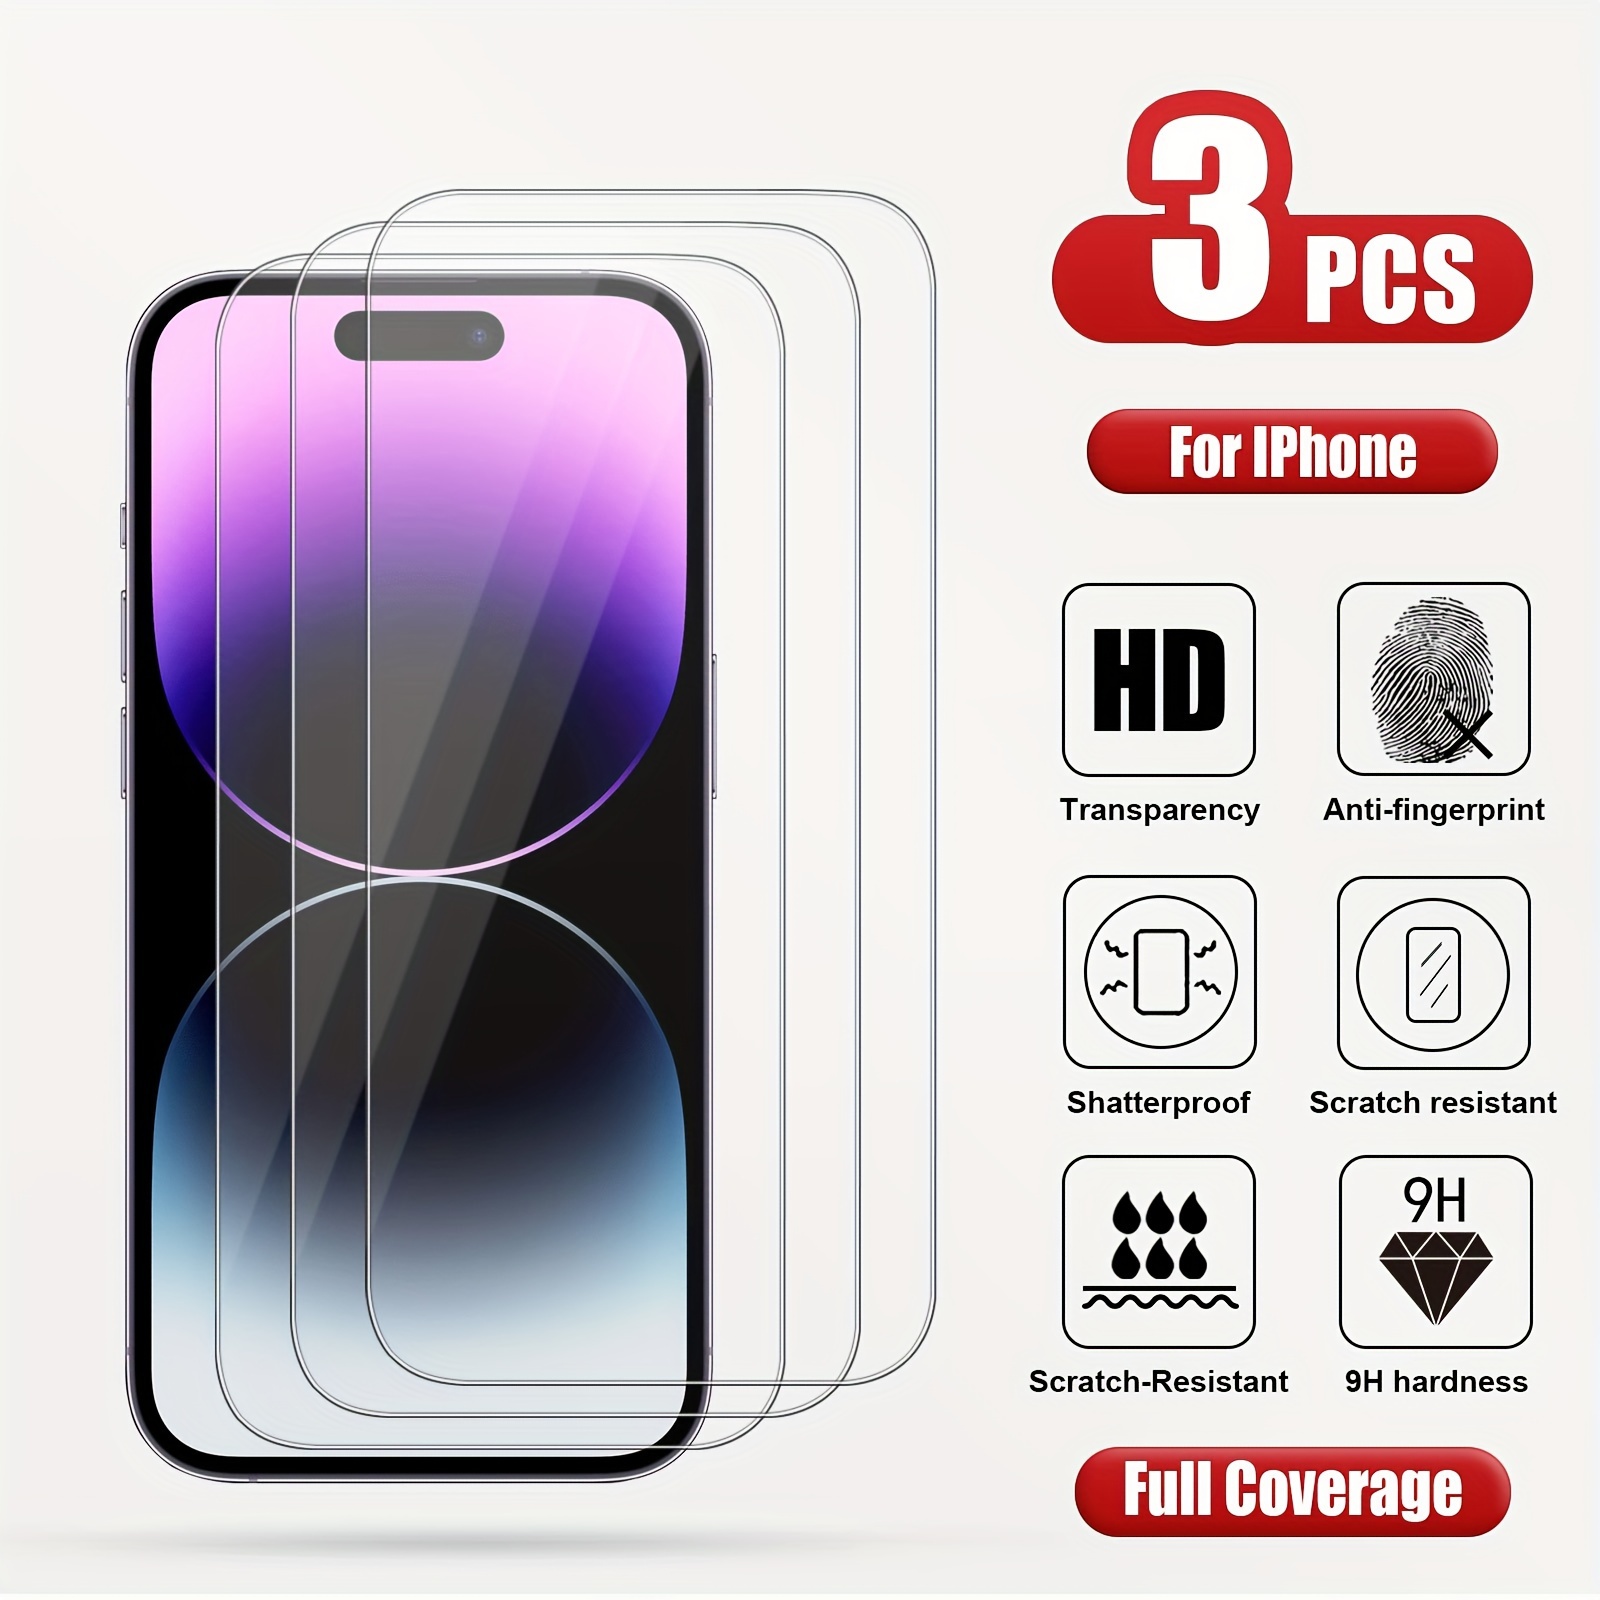 

Rkry 3-pack, Tempered Glass With Glossy Finish, Hd Clear Full Coverage, Anti-scratch, Anti-fingerprint, Shatterproof, 9h Hardness, Case-friendly Design With 150° Edge Ergonomics